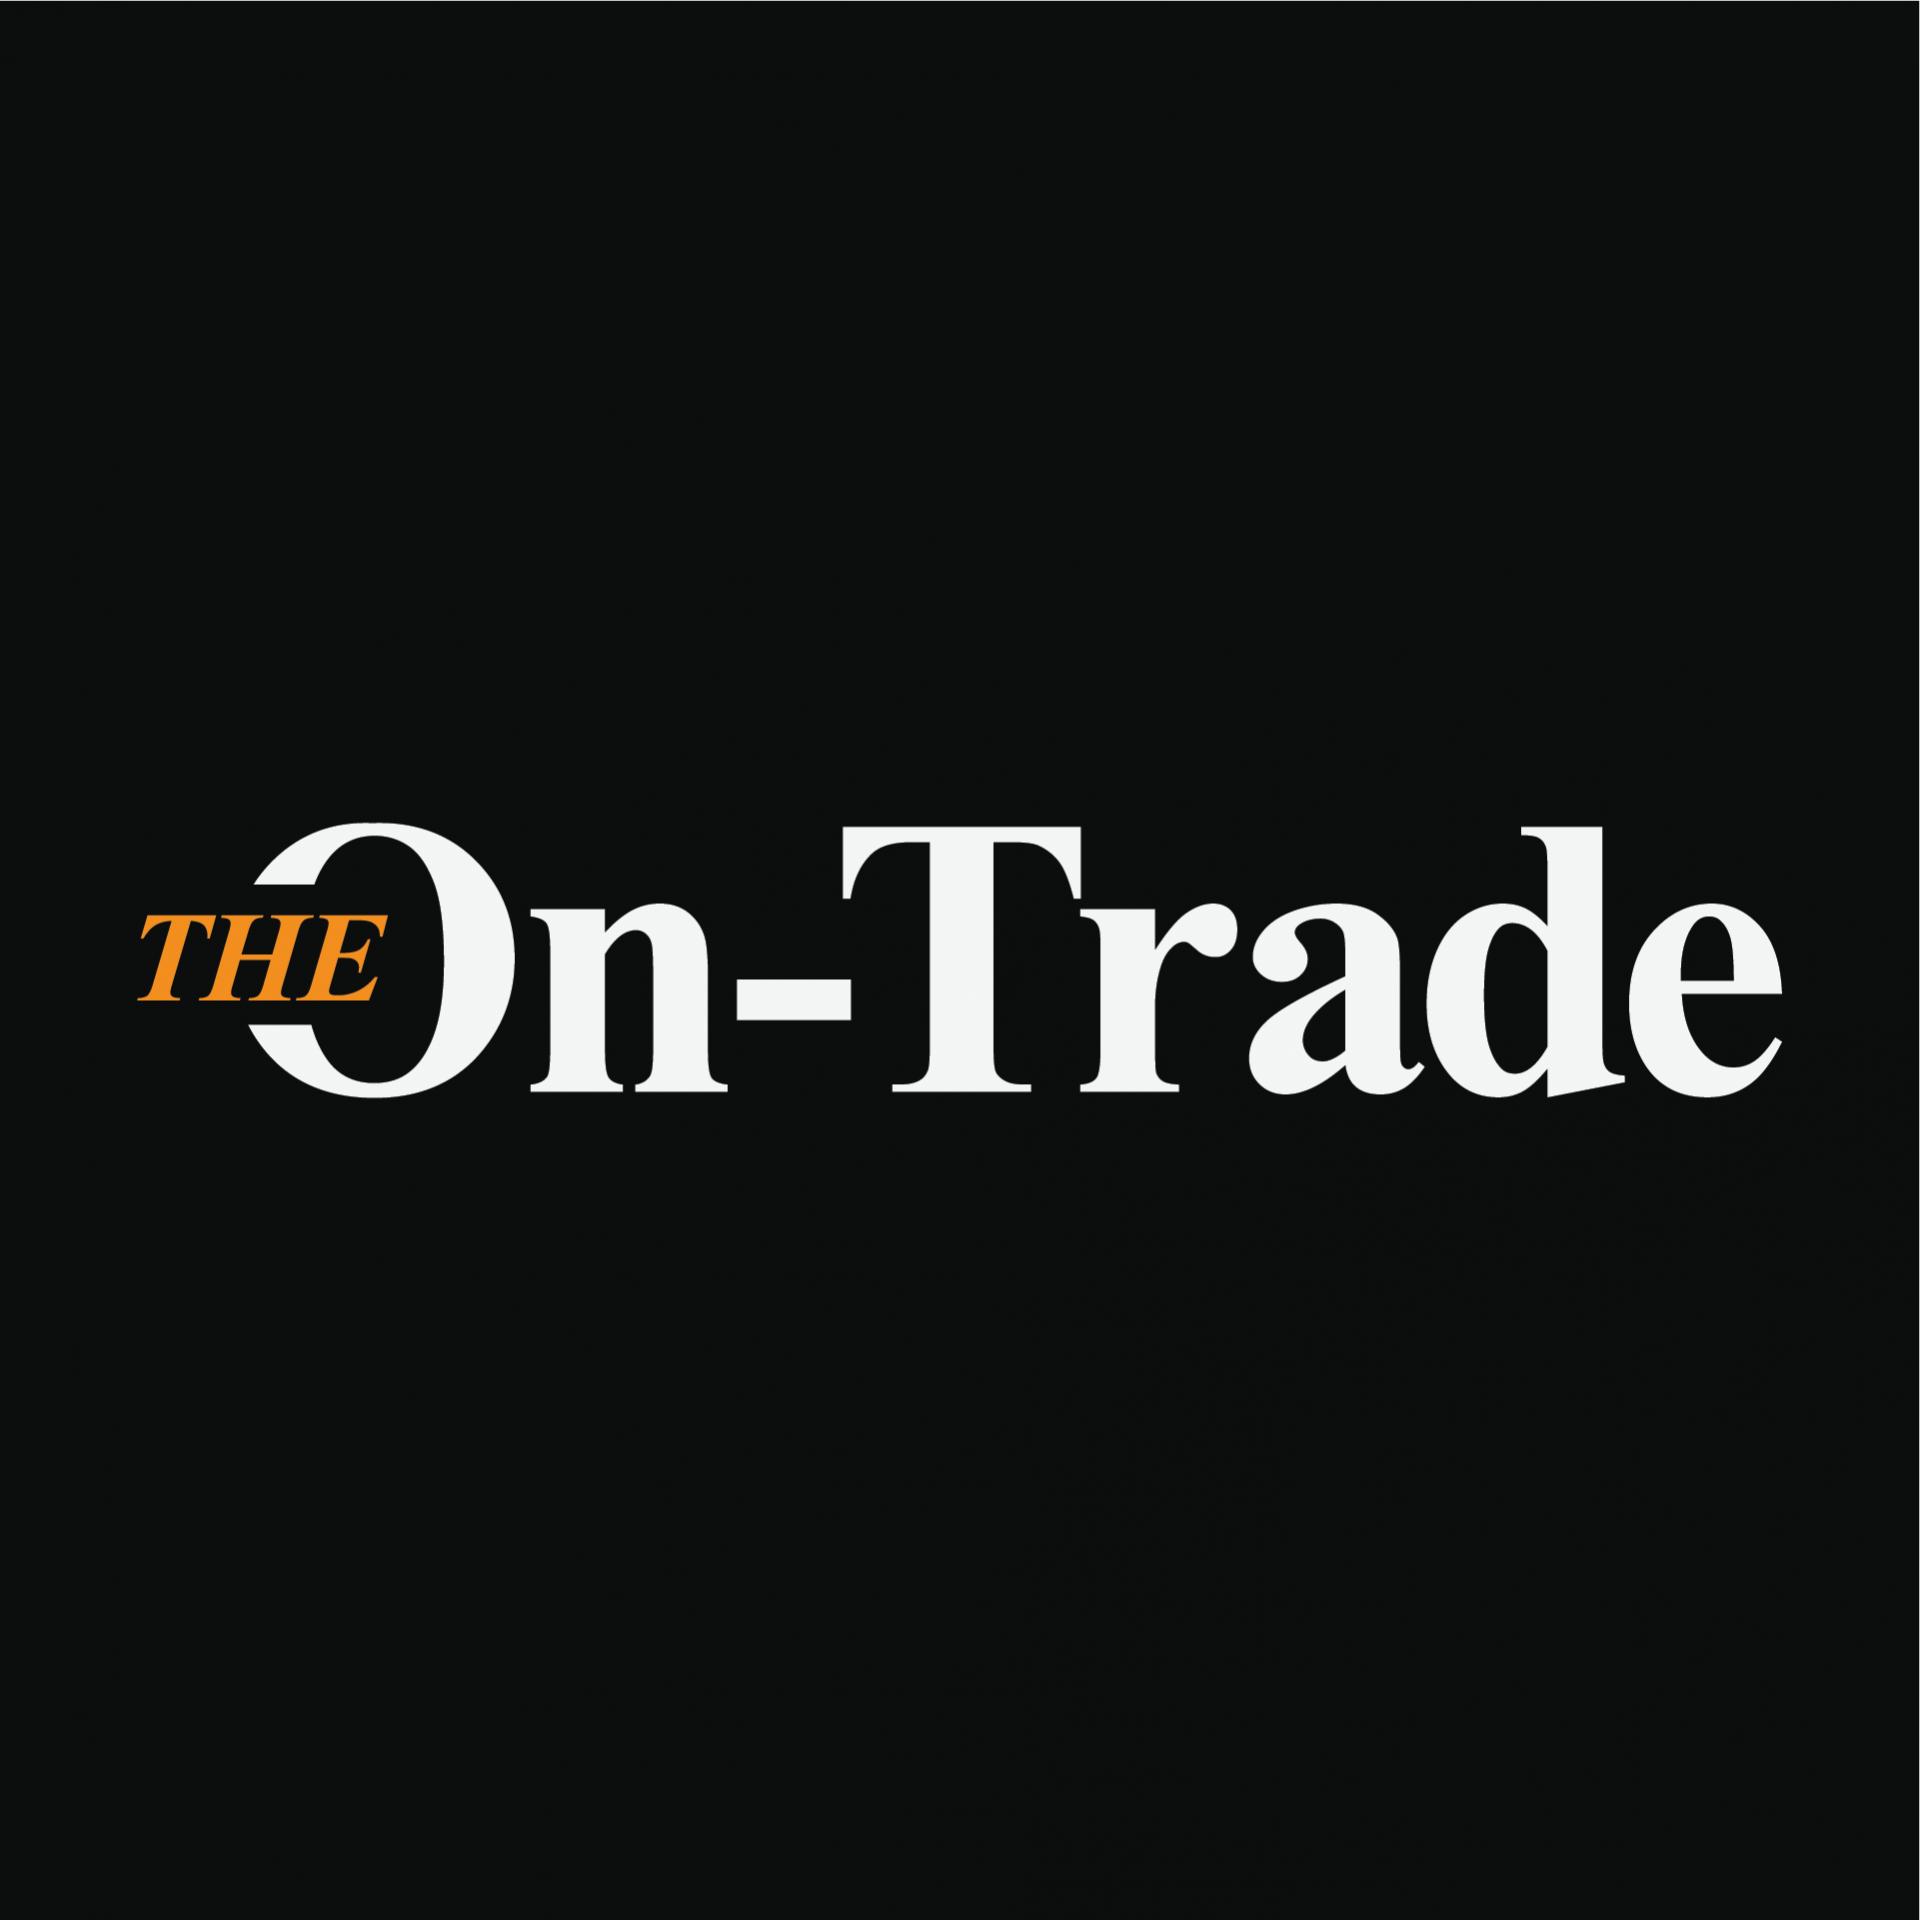 The On Trade